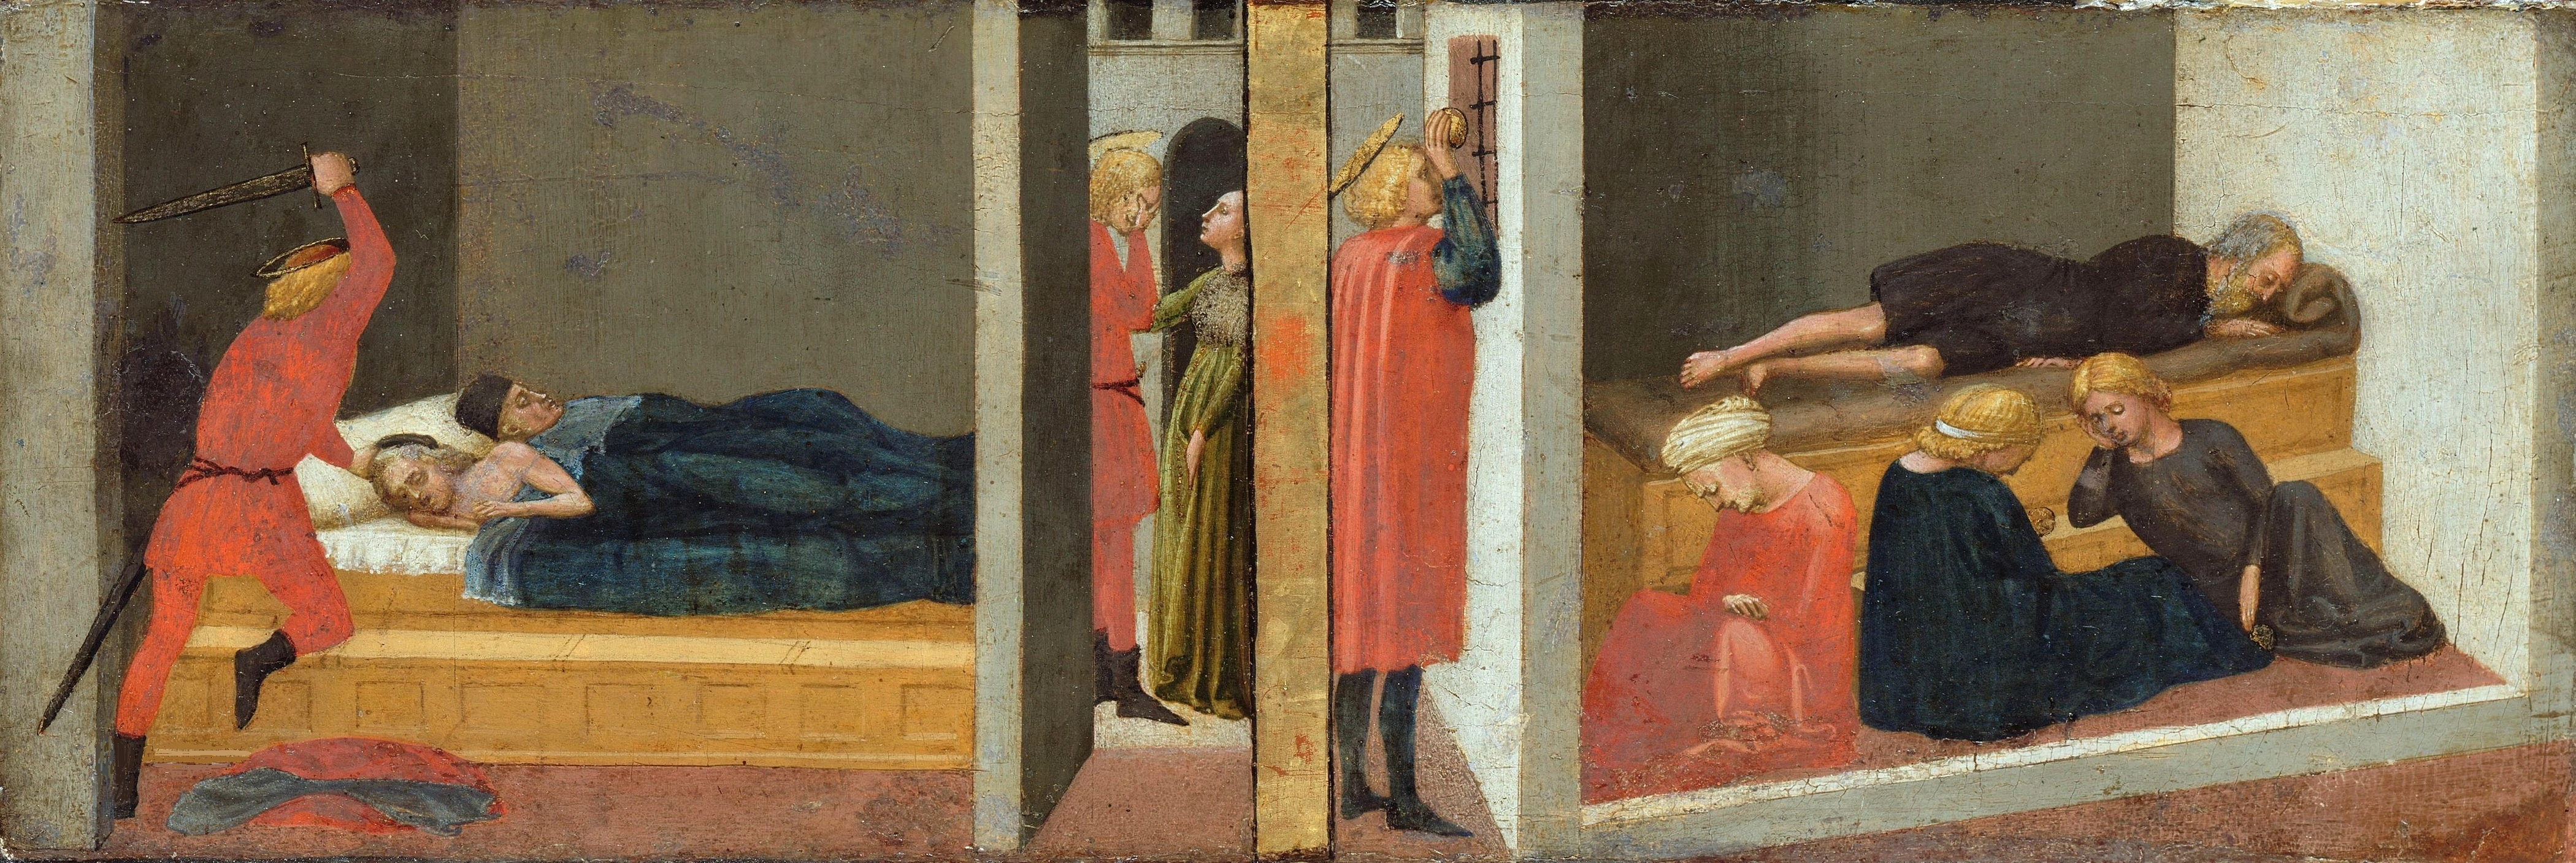 Episodes from the Lives of Saints Julian and Nicholas, Masaccio